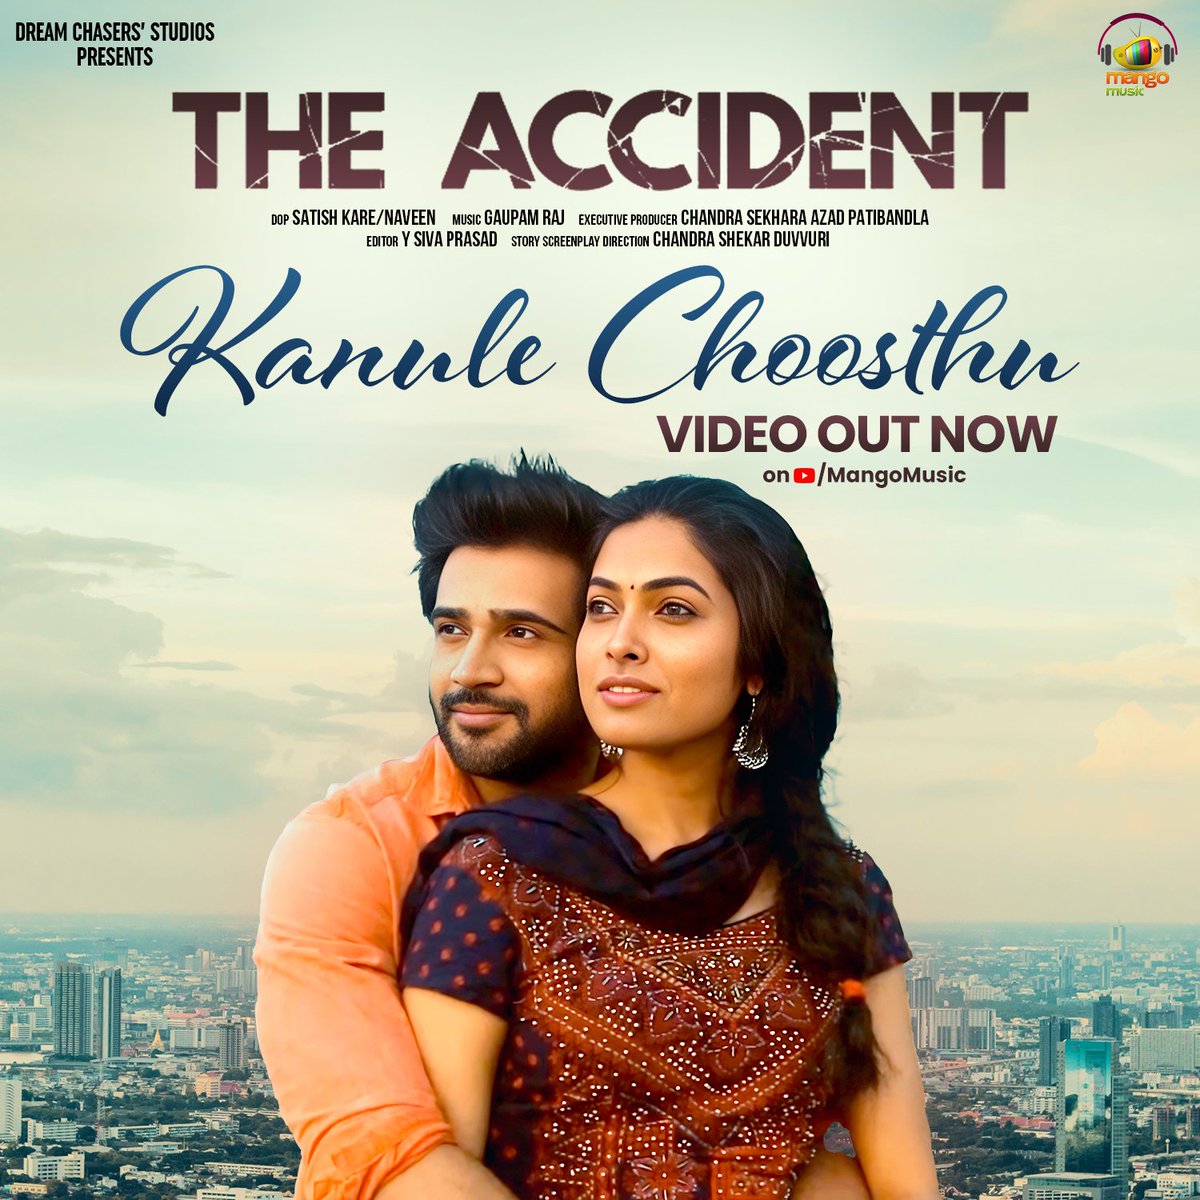 Experience the beauty of love through music with #KanuleChoosthu from #TheAccident movie. 🎶💑 

It's out now on @mangomusiclabel, don't miss out on this heartwarming melody💖🌟

🔗 youtu.be/PS3ekmHUiCw

🎤 Vocals - #sireeshabhagavatula #vocallyayaan

🖋️Lyrics - #Anilkishore